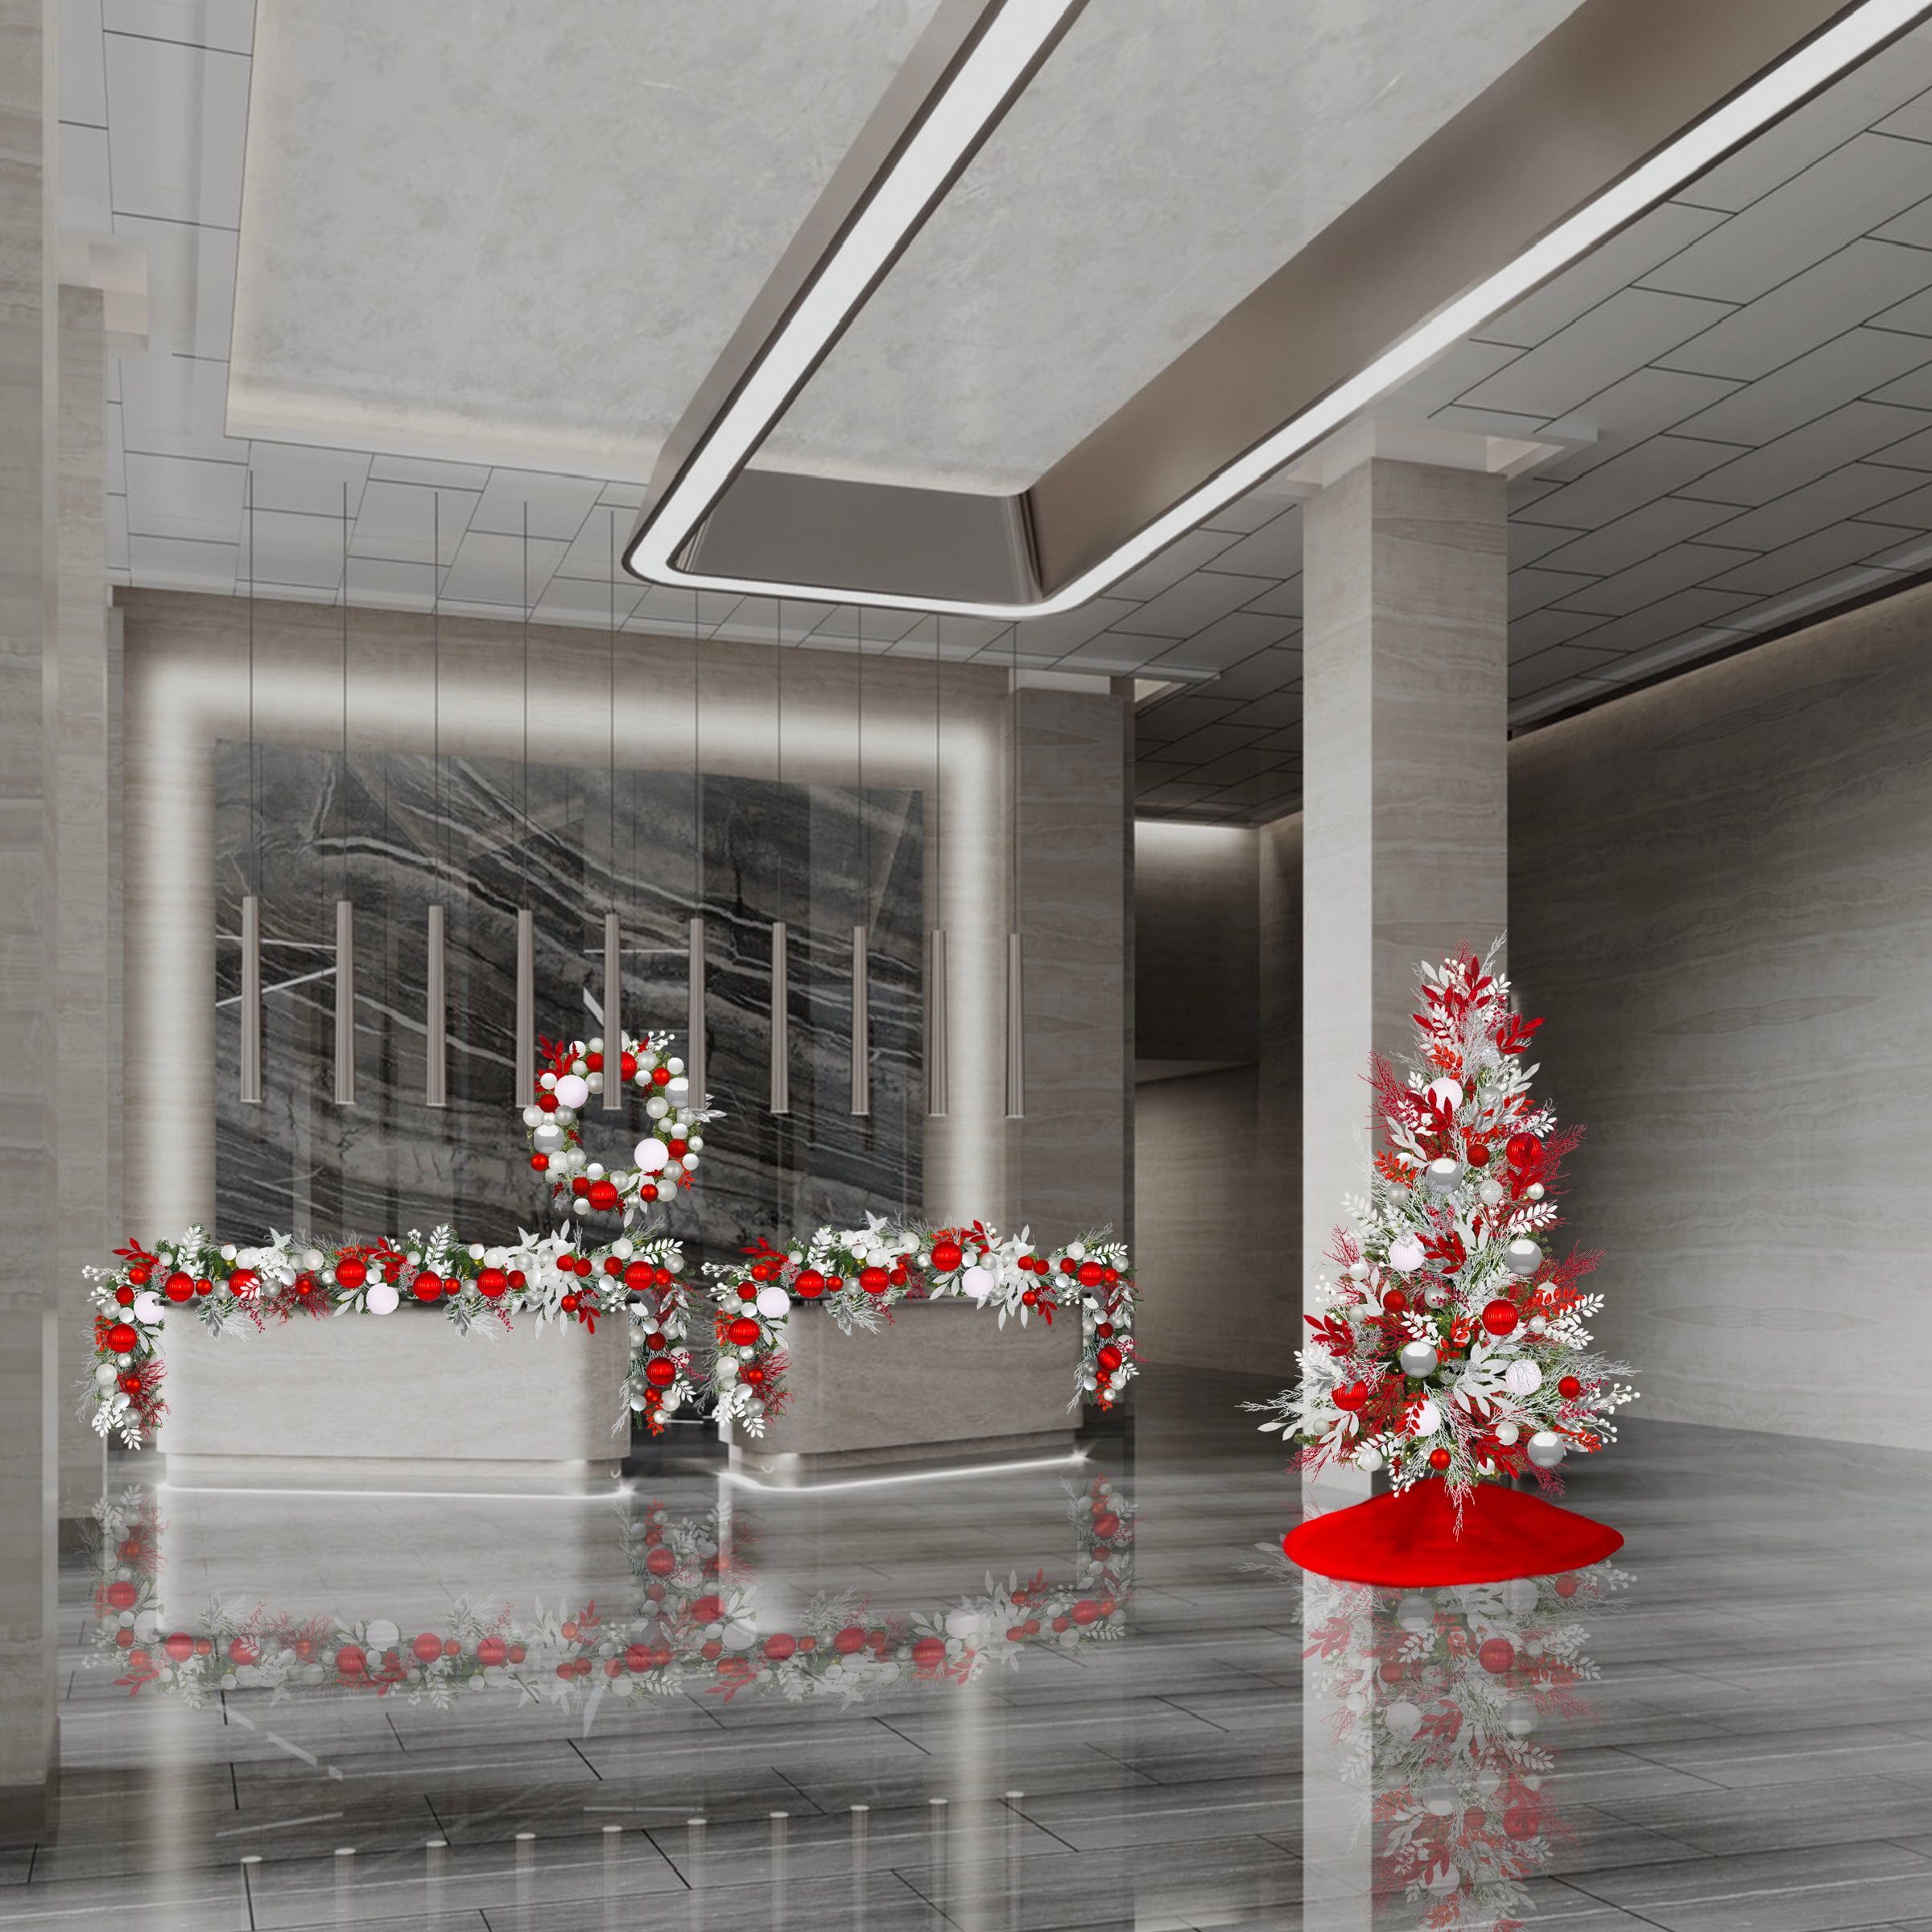 Pre-decorated Christmas greenery in corporate lobby